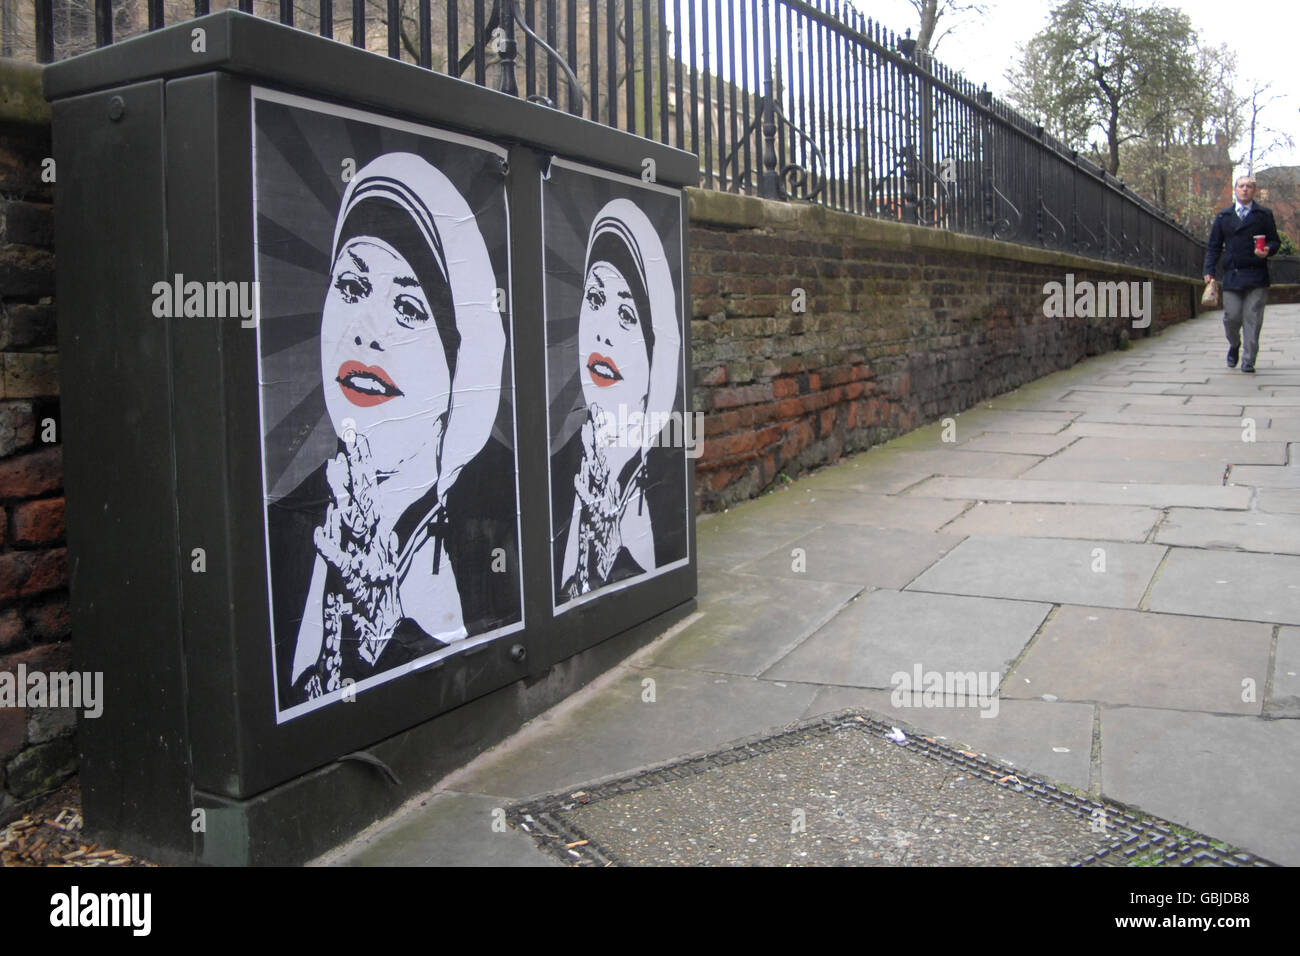 A graffiti artist's depiction of Jade Goody appearing as Mother Teresa outside Saint Mary's Church in Nottingham Stock Photo